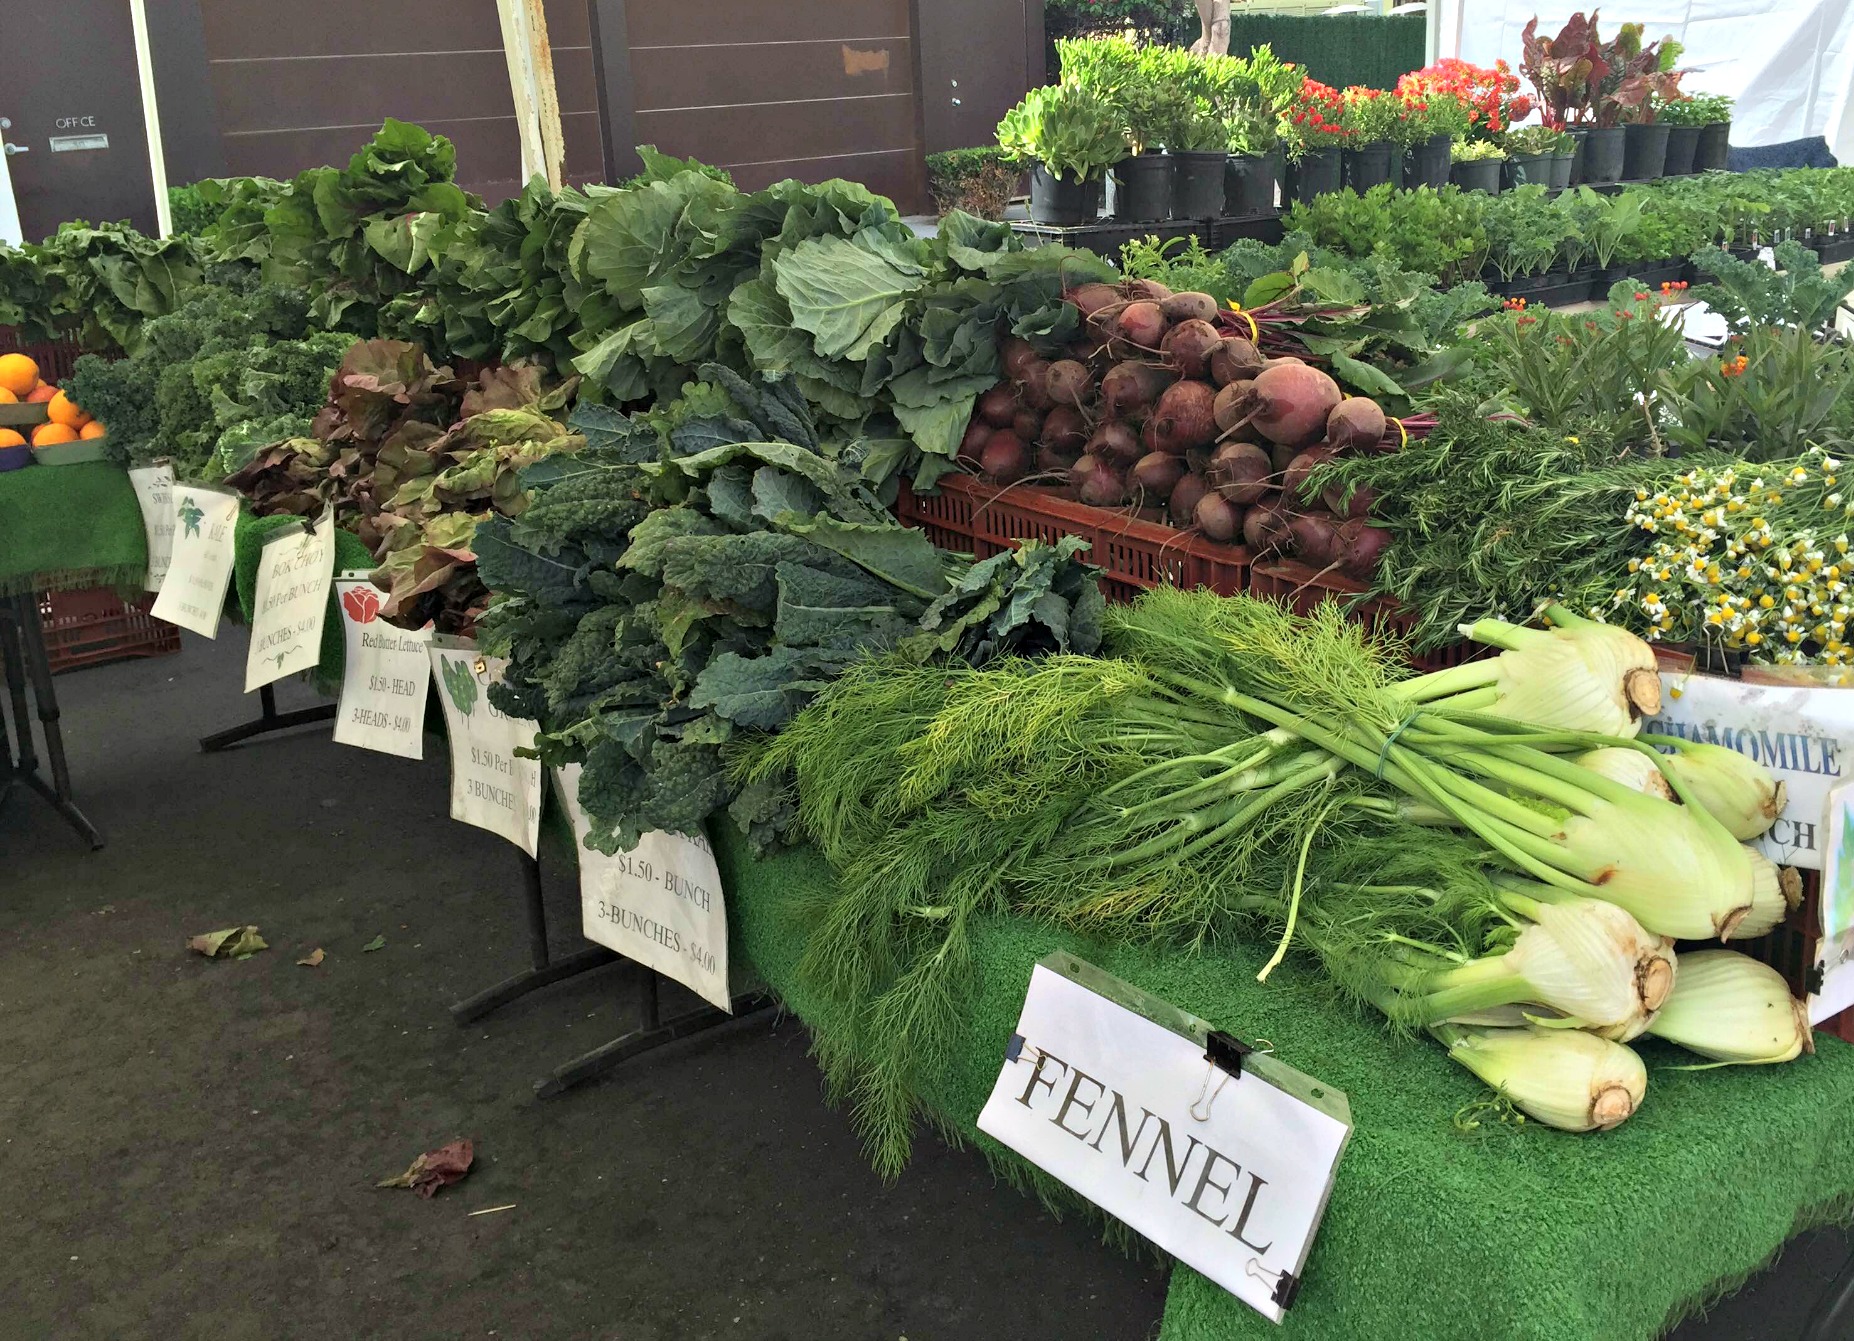 Veggies at the San Diego Farmer's Market, including lots of kale!